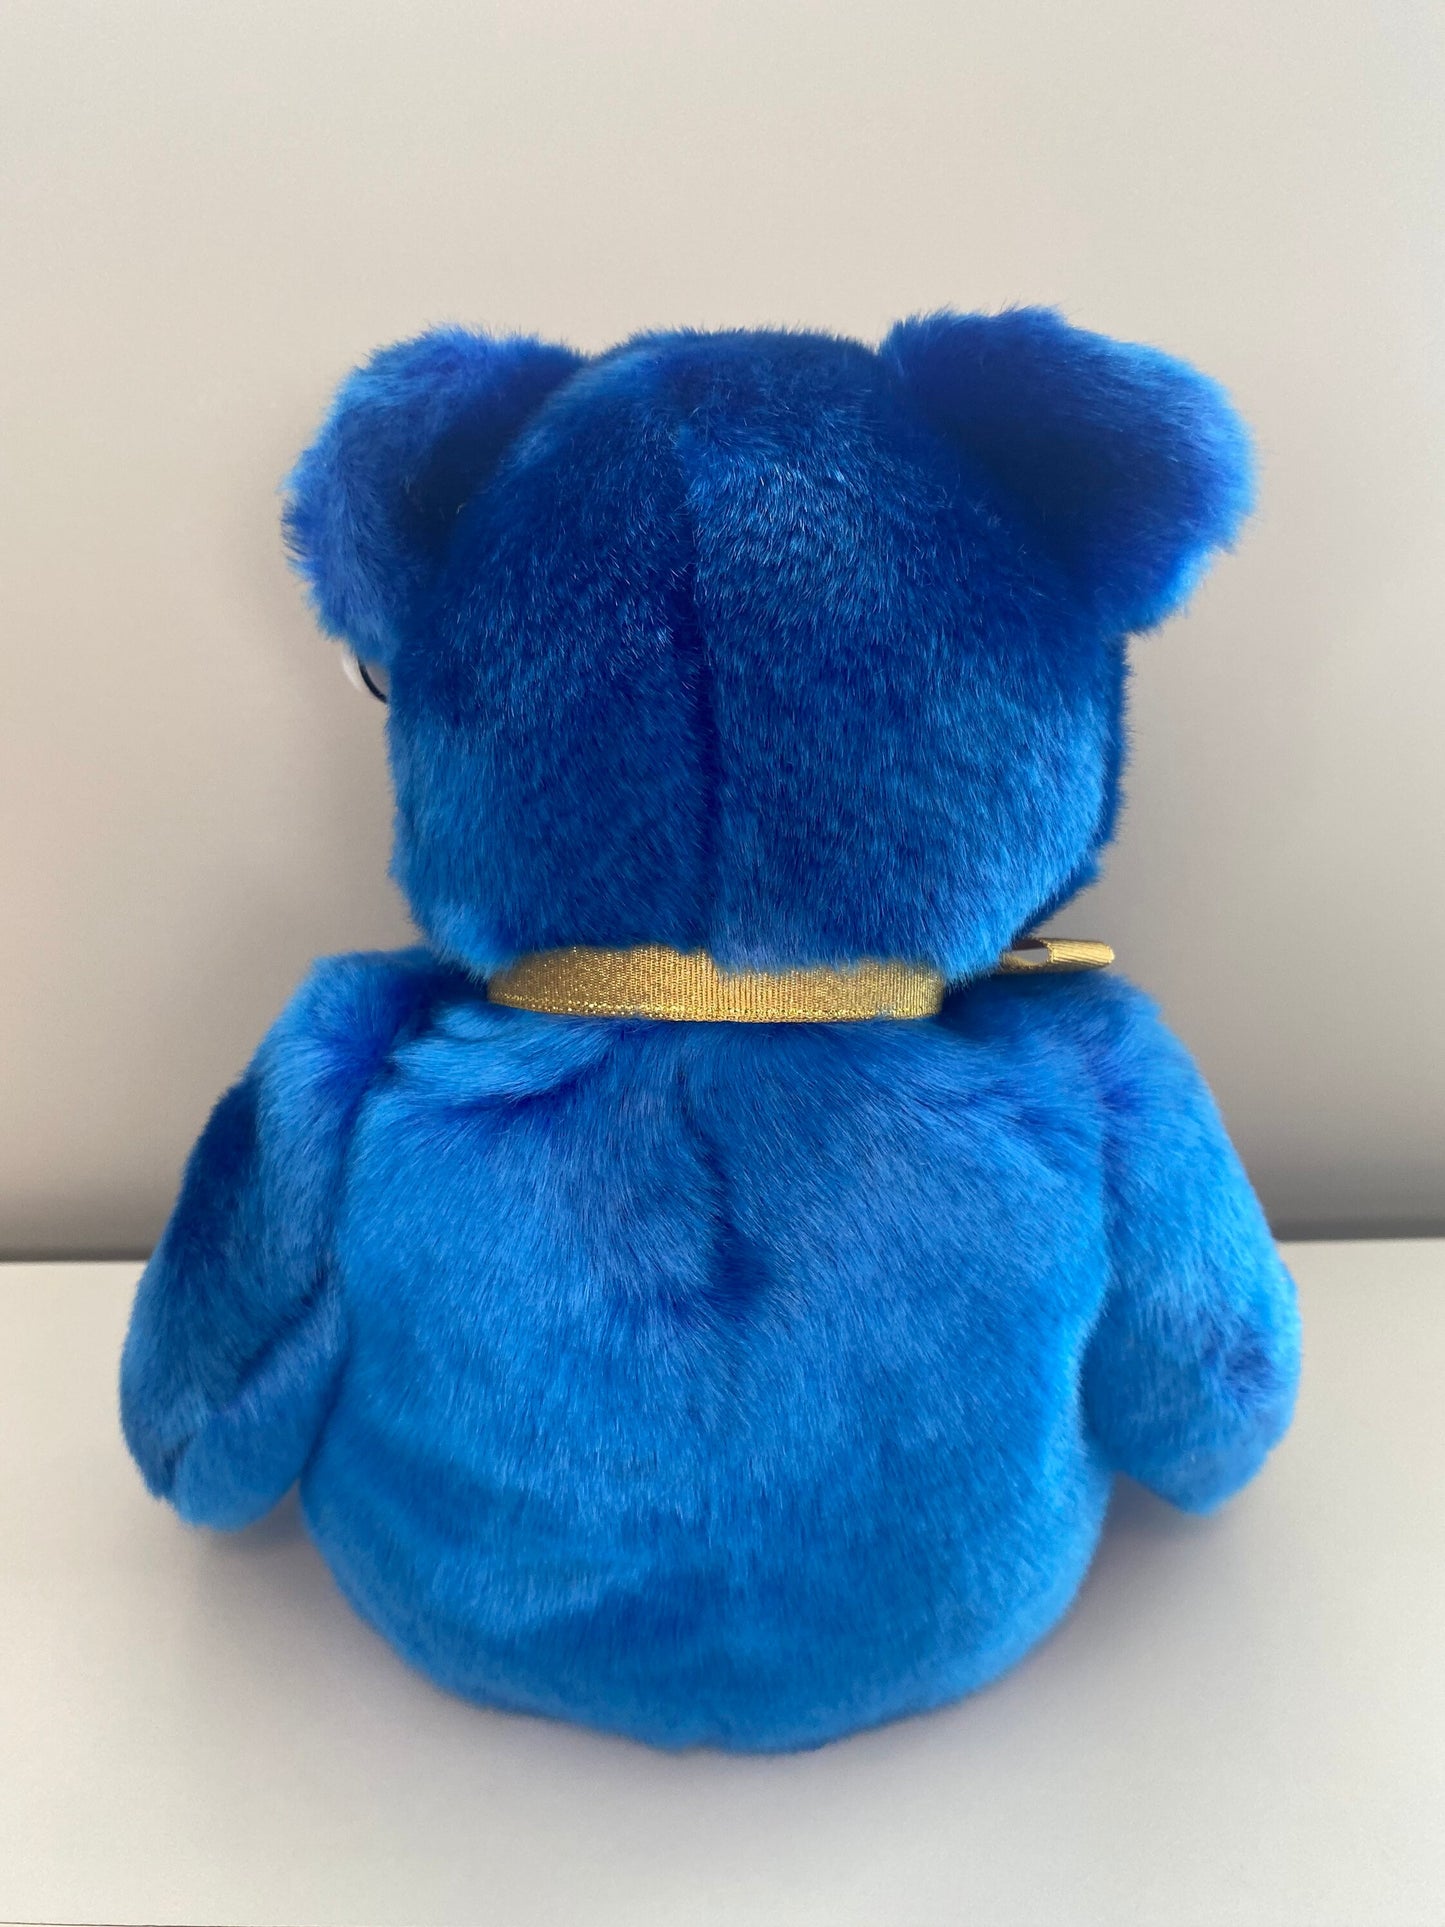 Ty Beanie Buddy  “Unity” the Blue Bear - Europe Exclusive (13.5 inch)